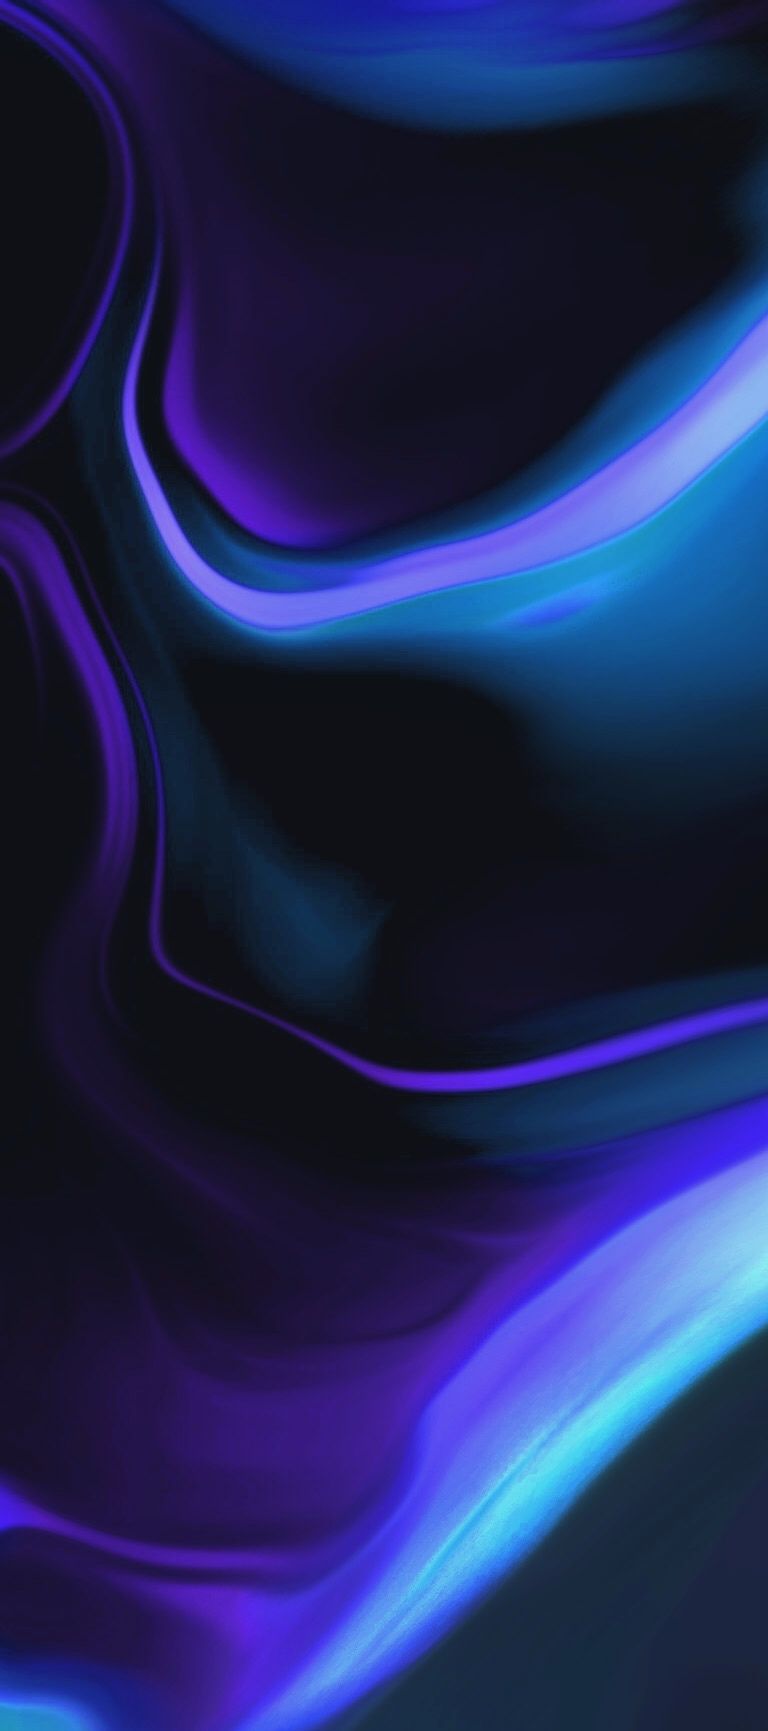 The Purple and black. Samsung wallpaper, iPhone wallpaper, Cellphone wallpaper